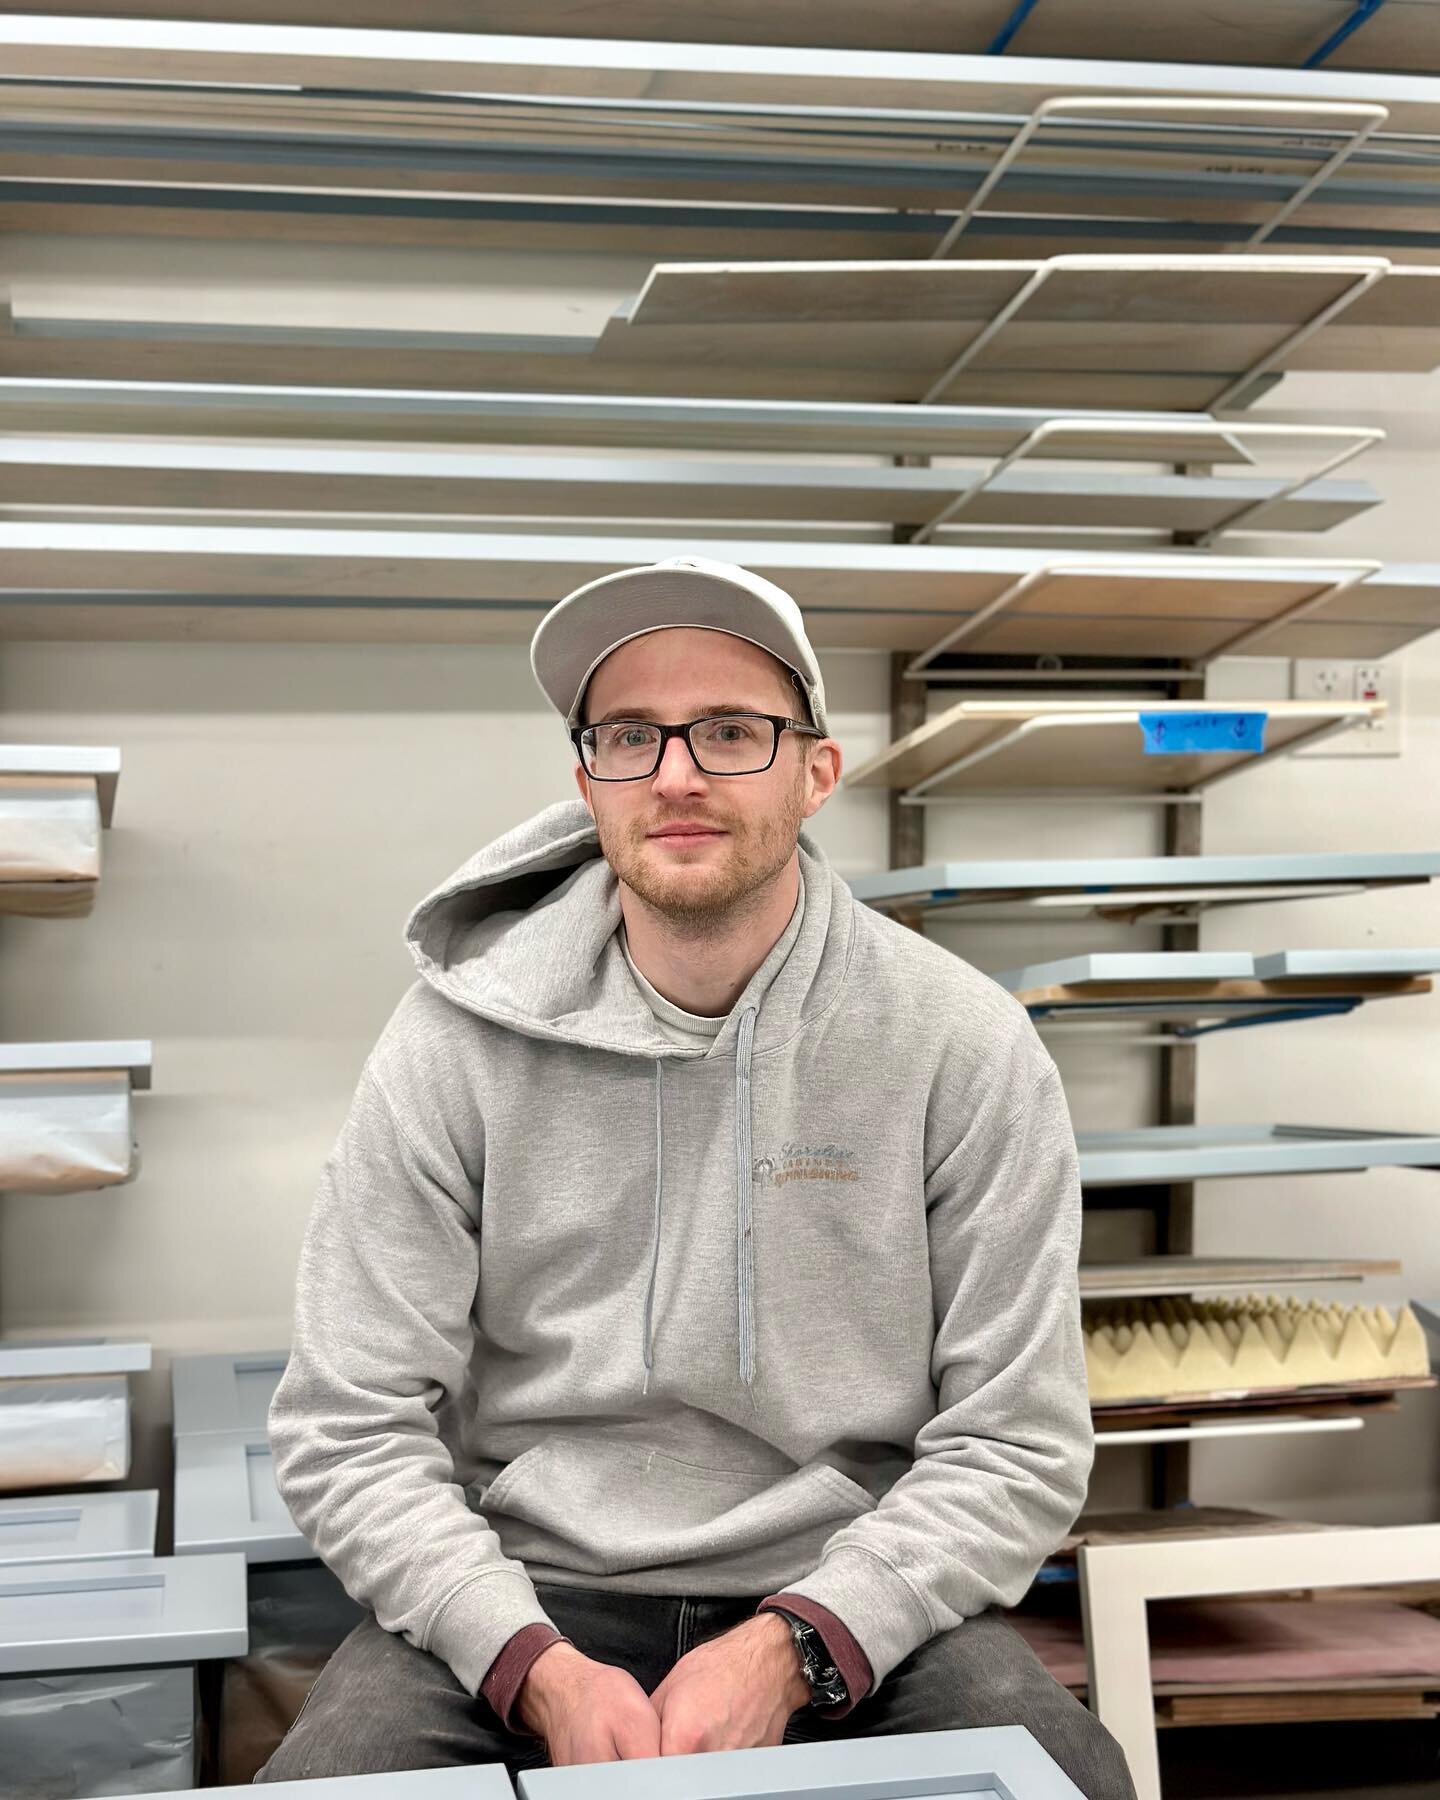 #meettheteam 

Hello everyone! This is our most anticipated #meettheteam post yet&hellip;.We would like to introduce another member of our Shoreline Cabinet Refinishing team, Kyle!

Kyle joined Shoreline a few years back as a painting apprentice with